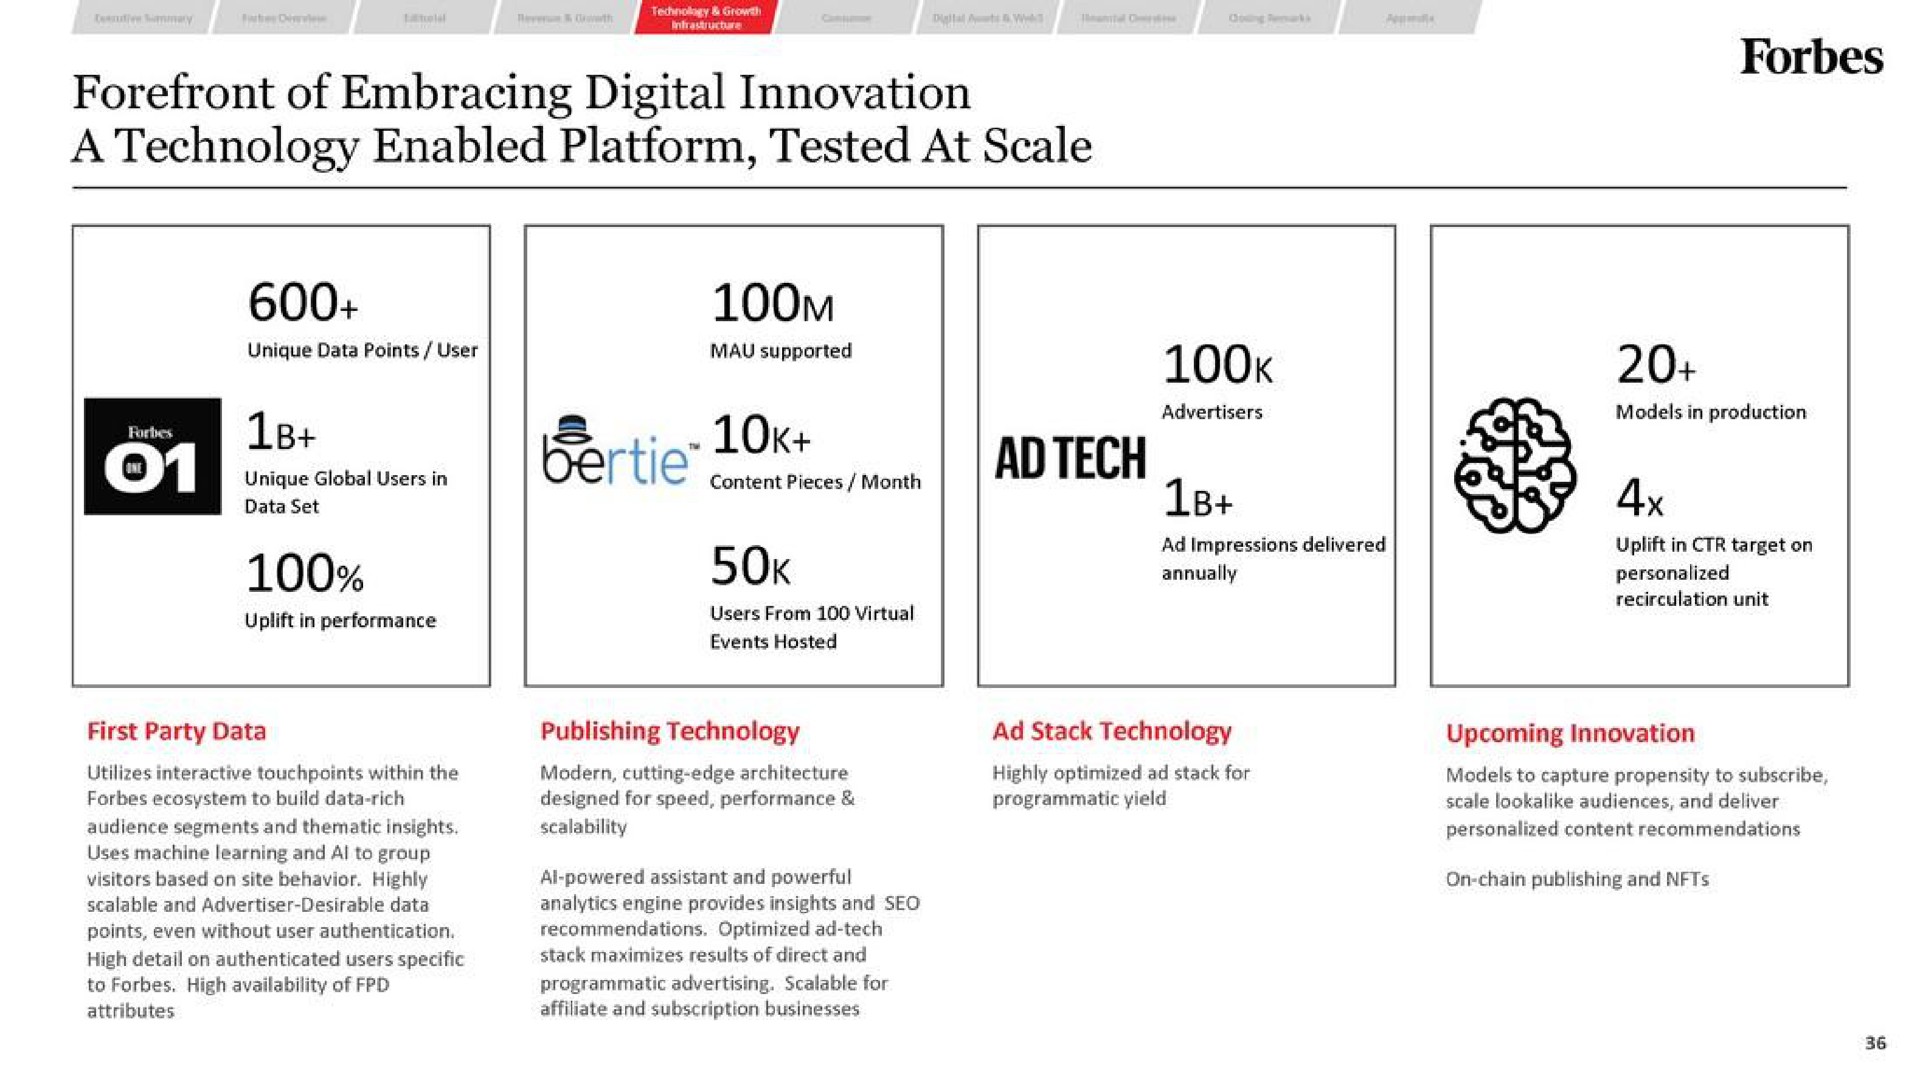 forefront of embracing digital innovation a technology enabled platform tested at scale tech | Forbes